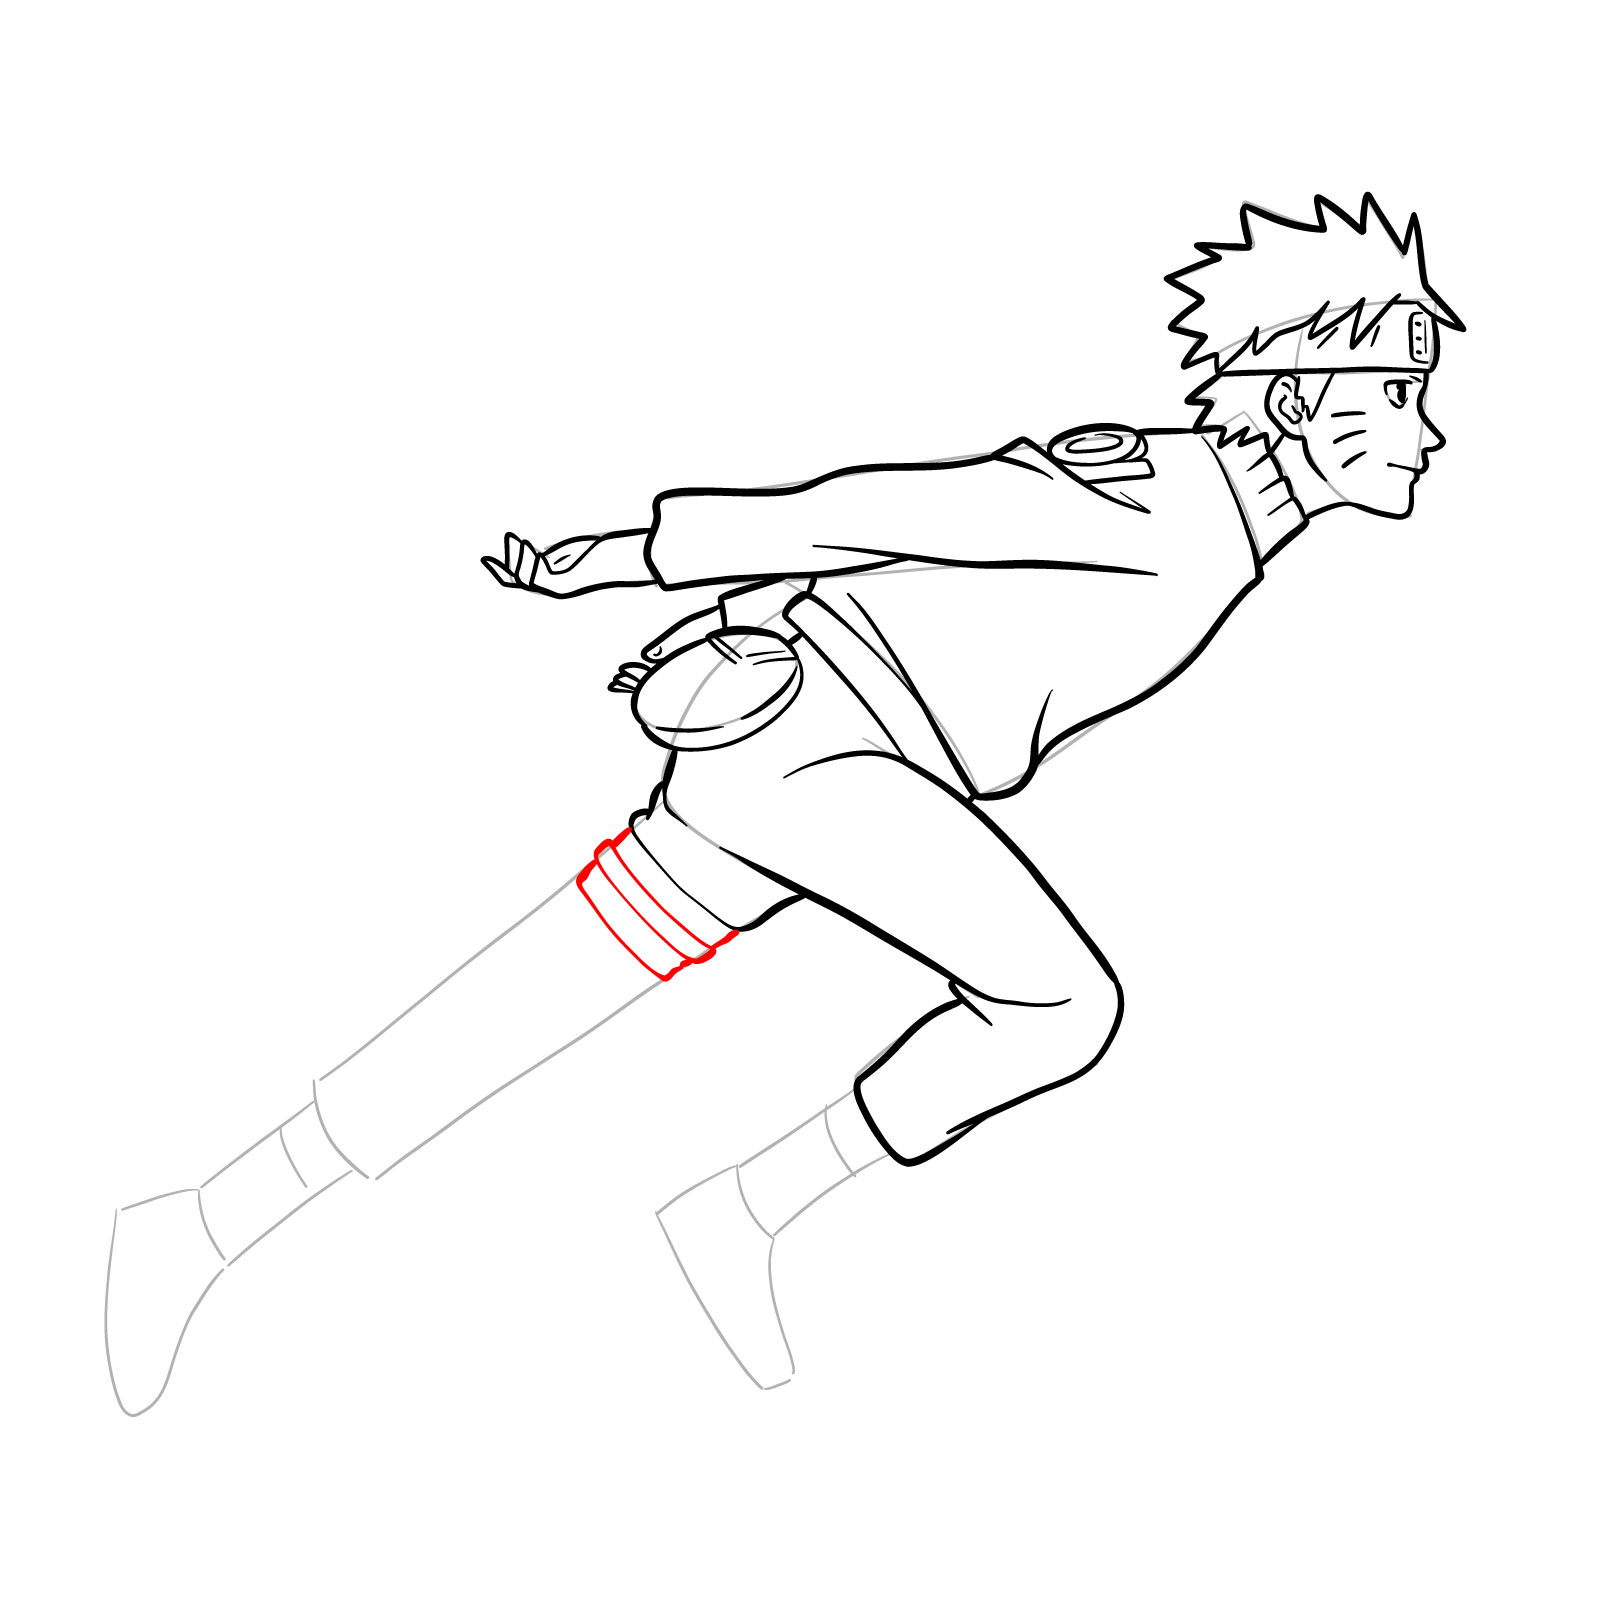 How to draw Naruto running - step 30